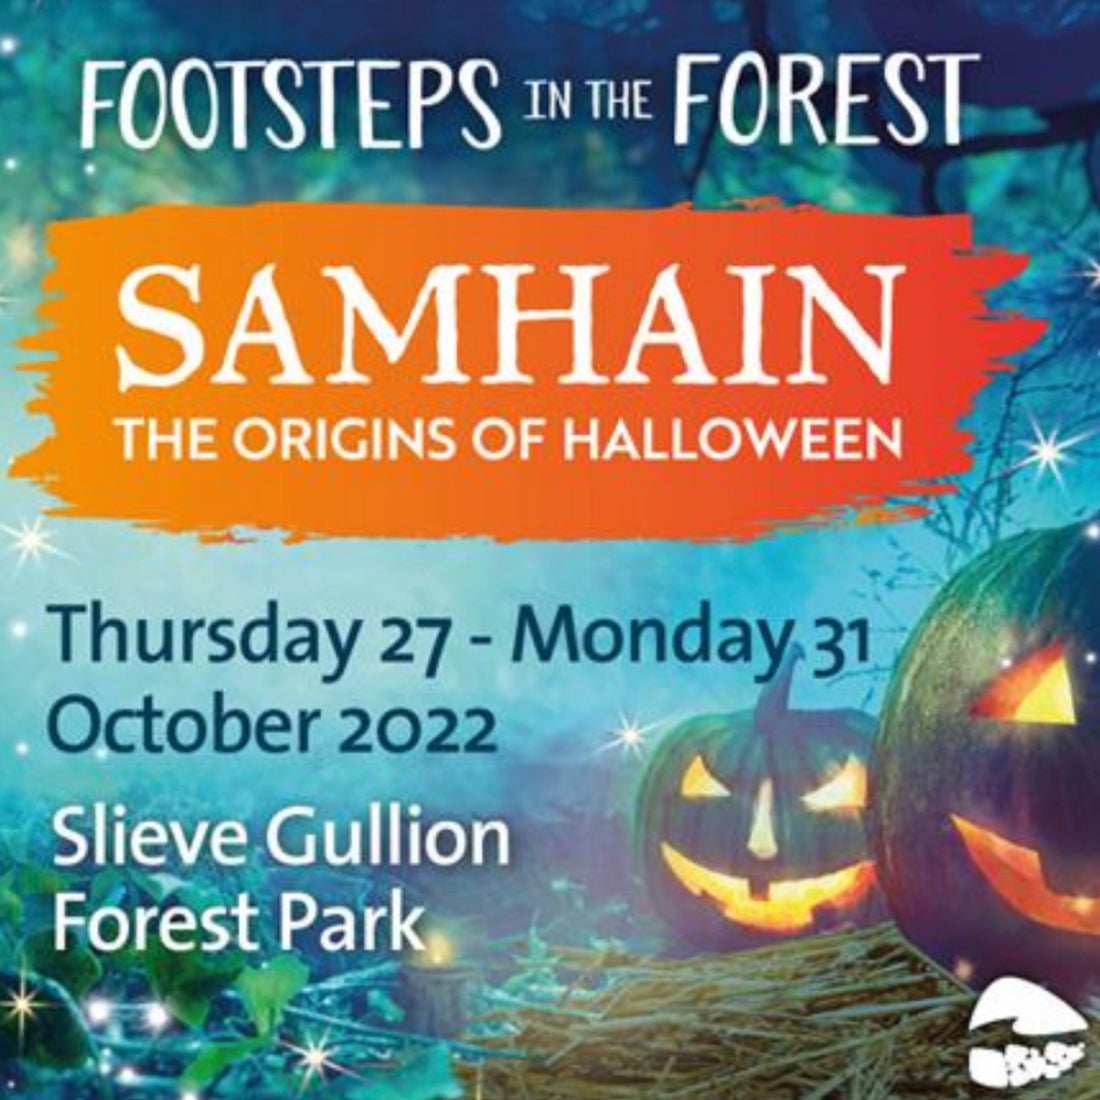 Footsteps in the Forest, a magical Halloween experience in Slieve Gullion Forest Park